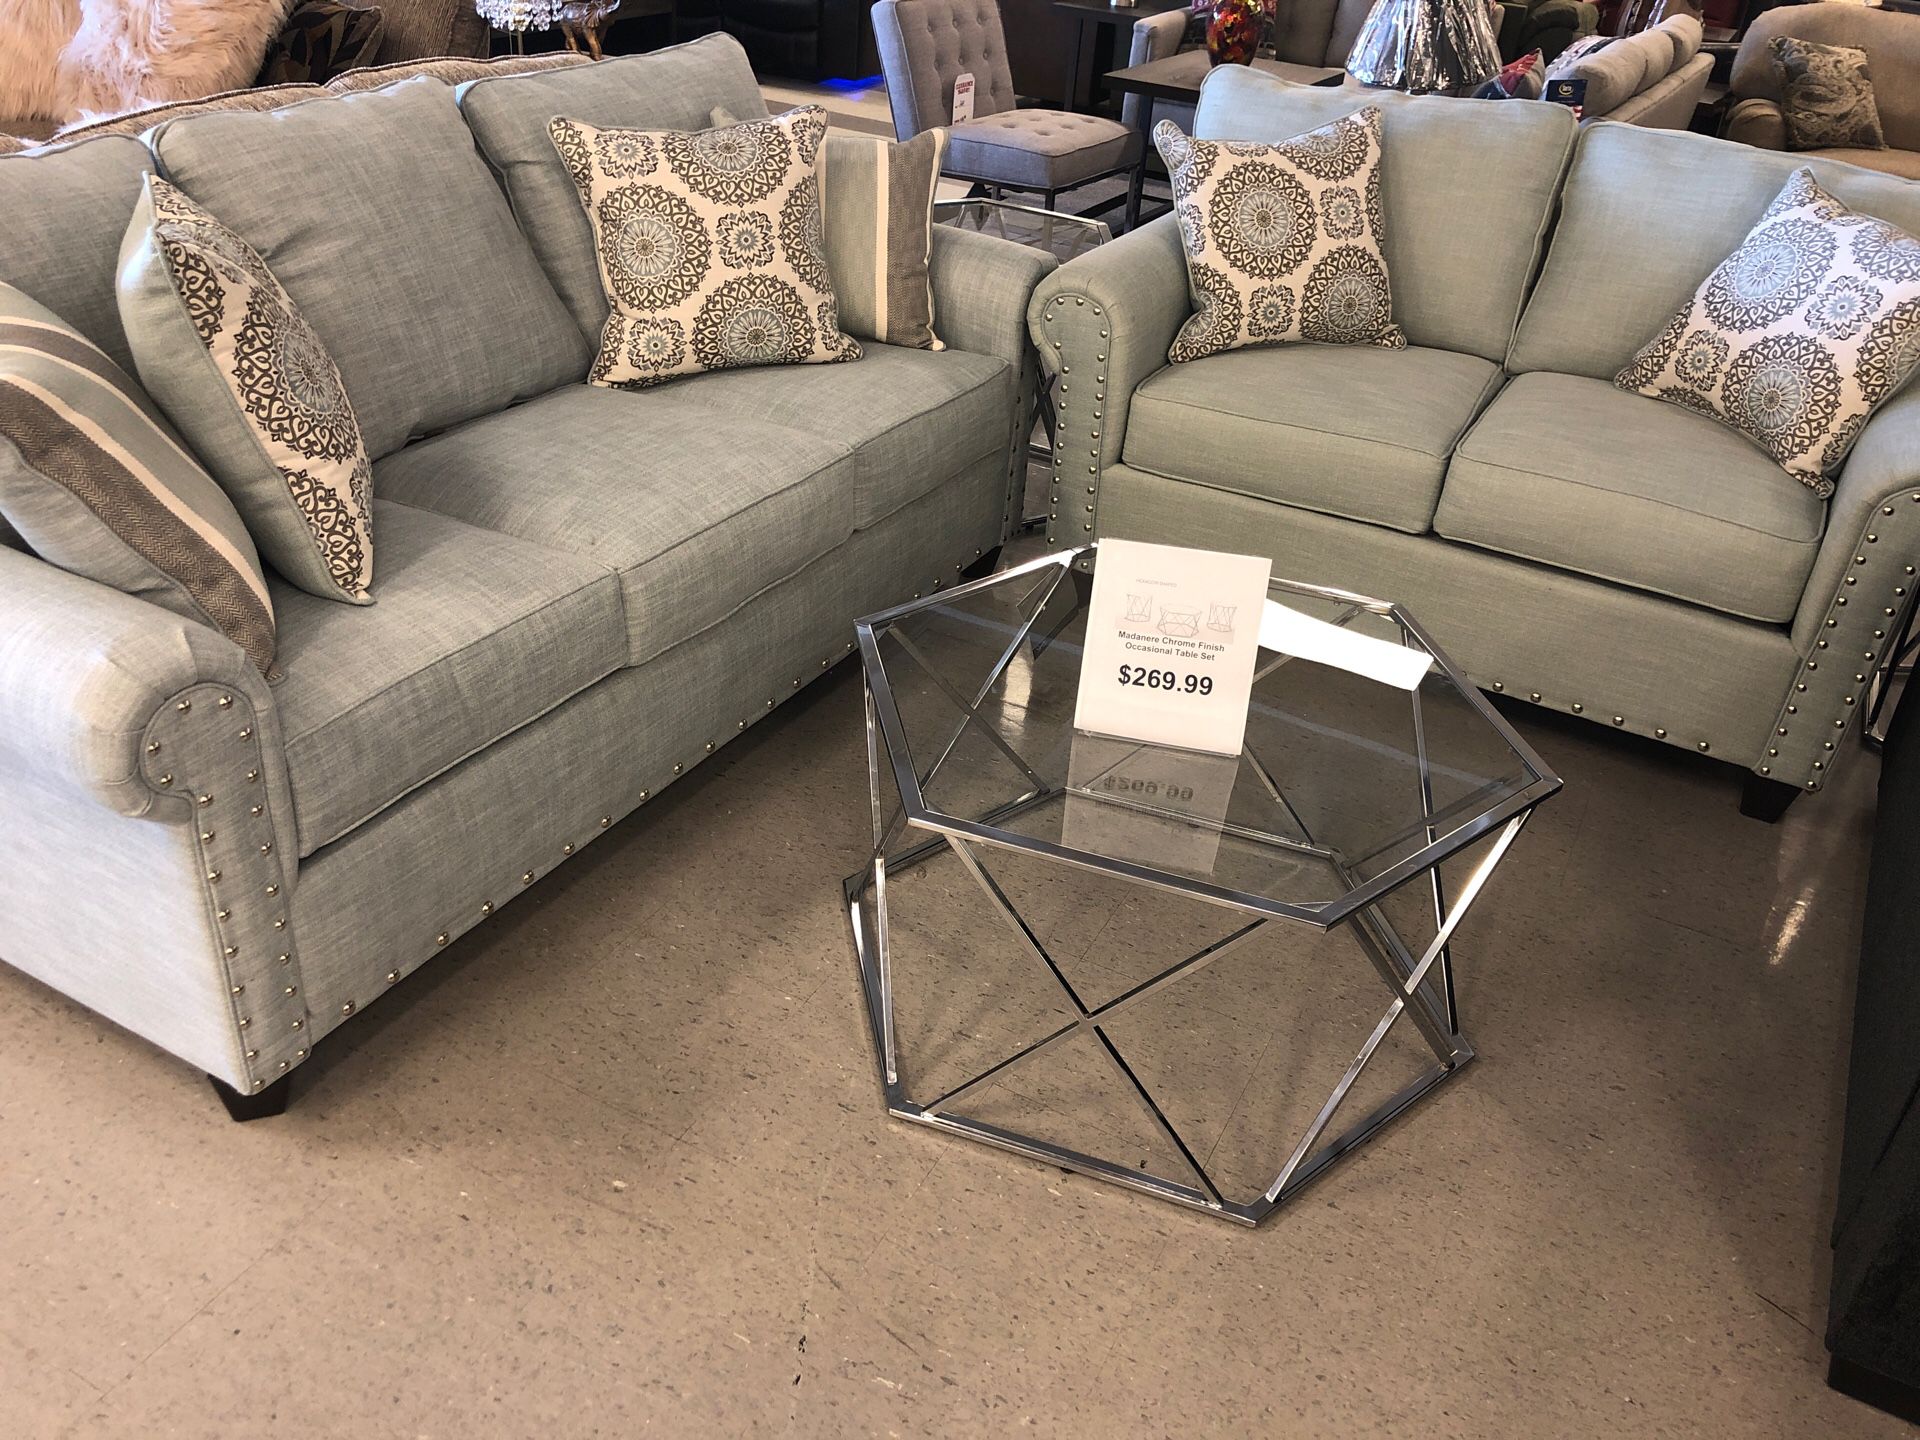 Huge furniture sale up to 80% off display items in store only